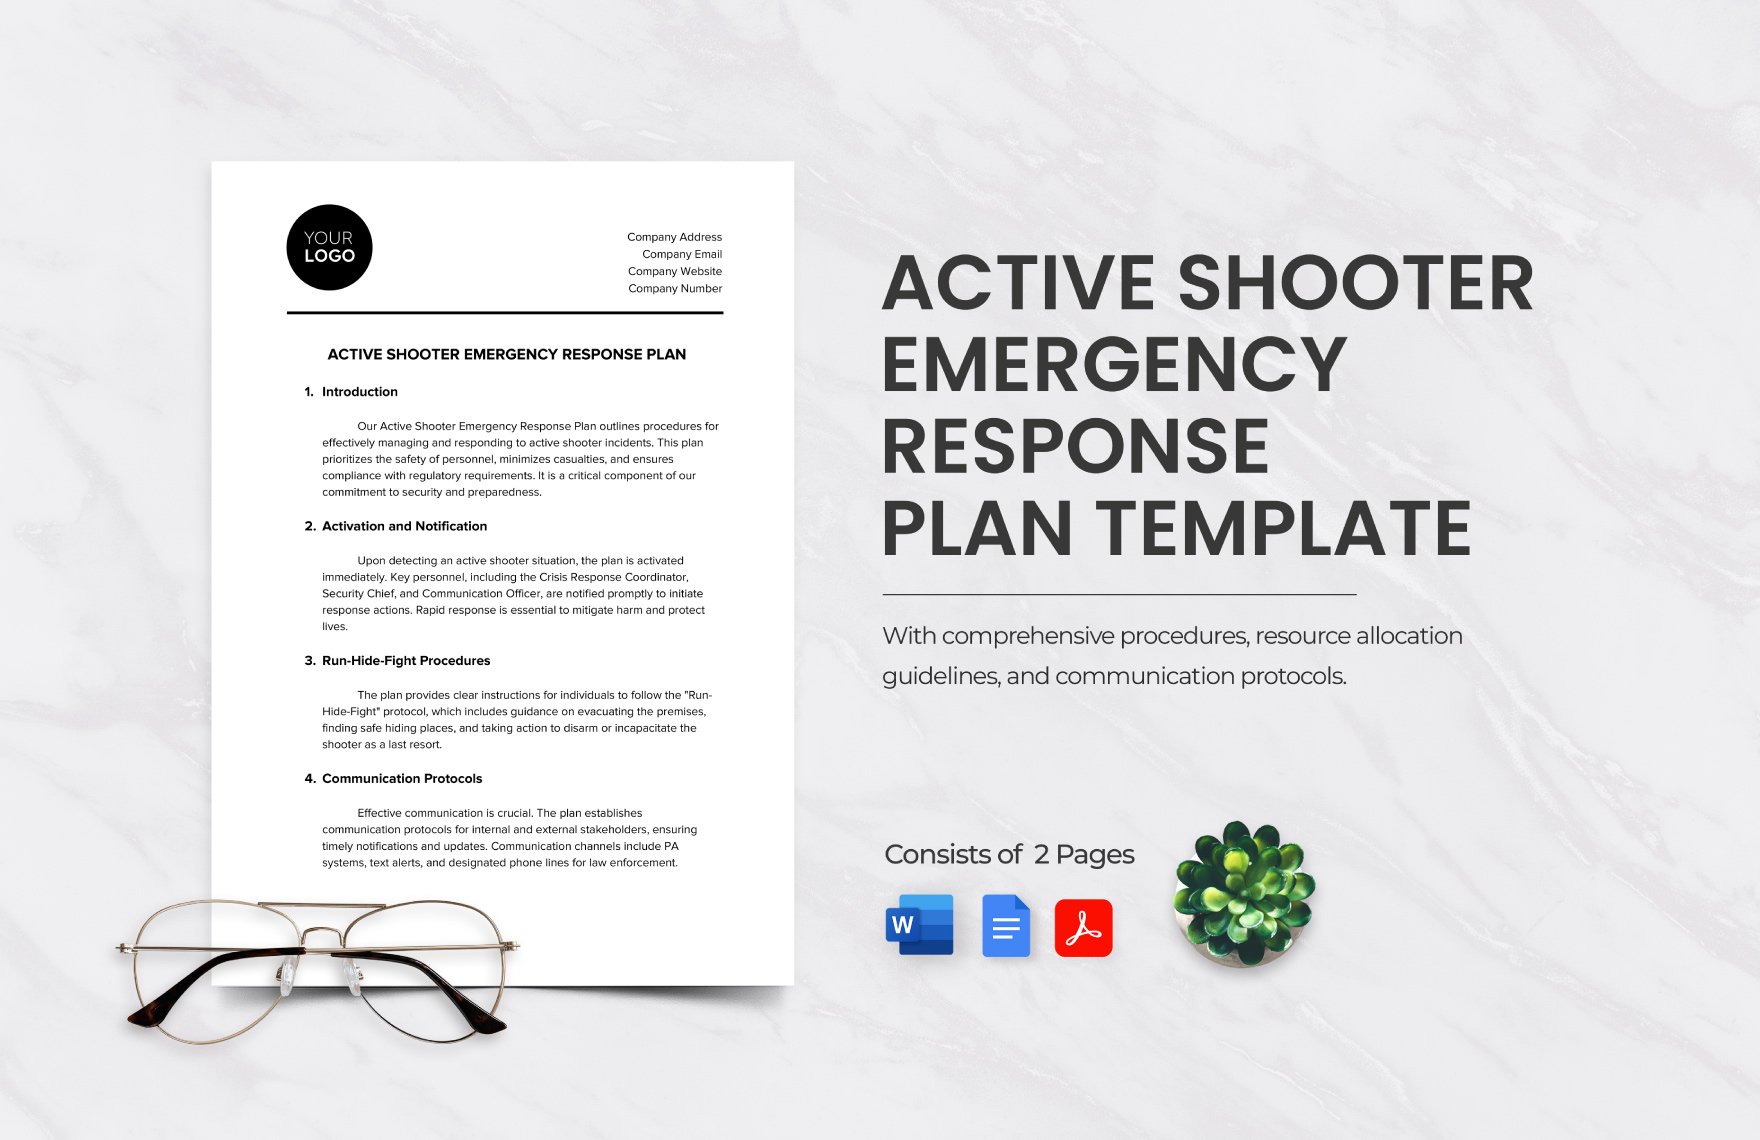 Active Shooter Emergency Response Plan Template in Word, Google Docs, PDF